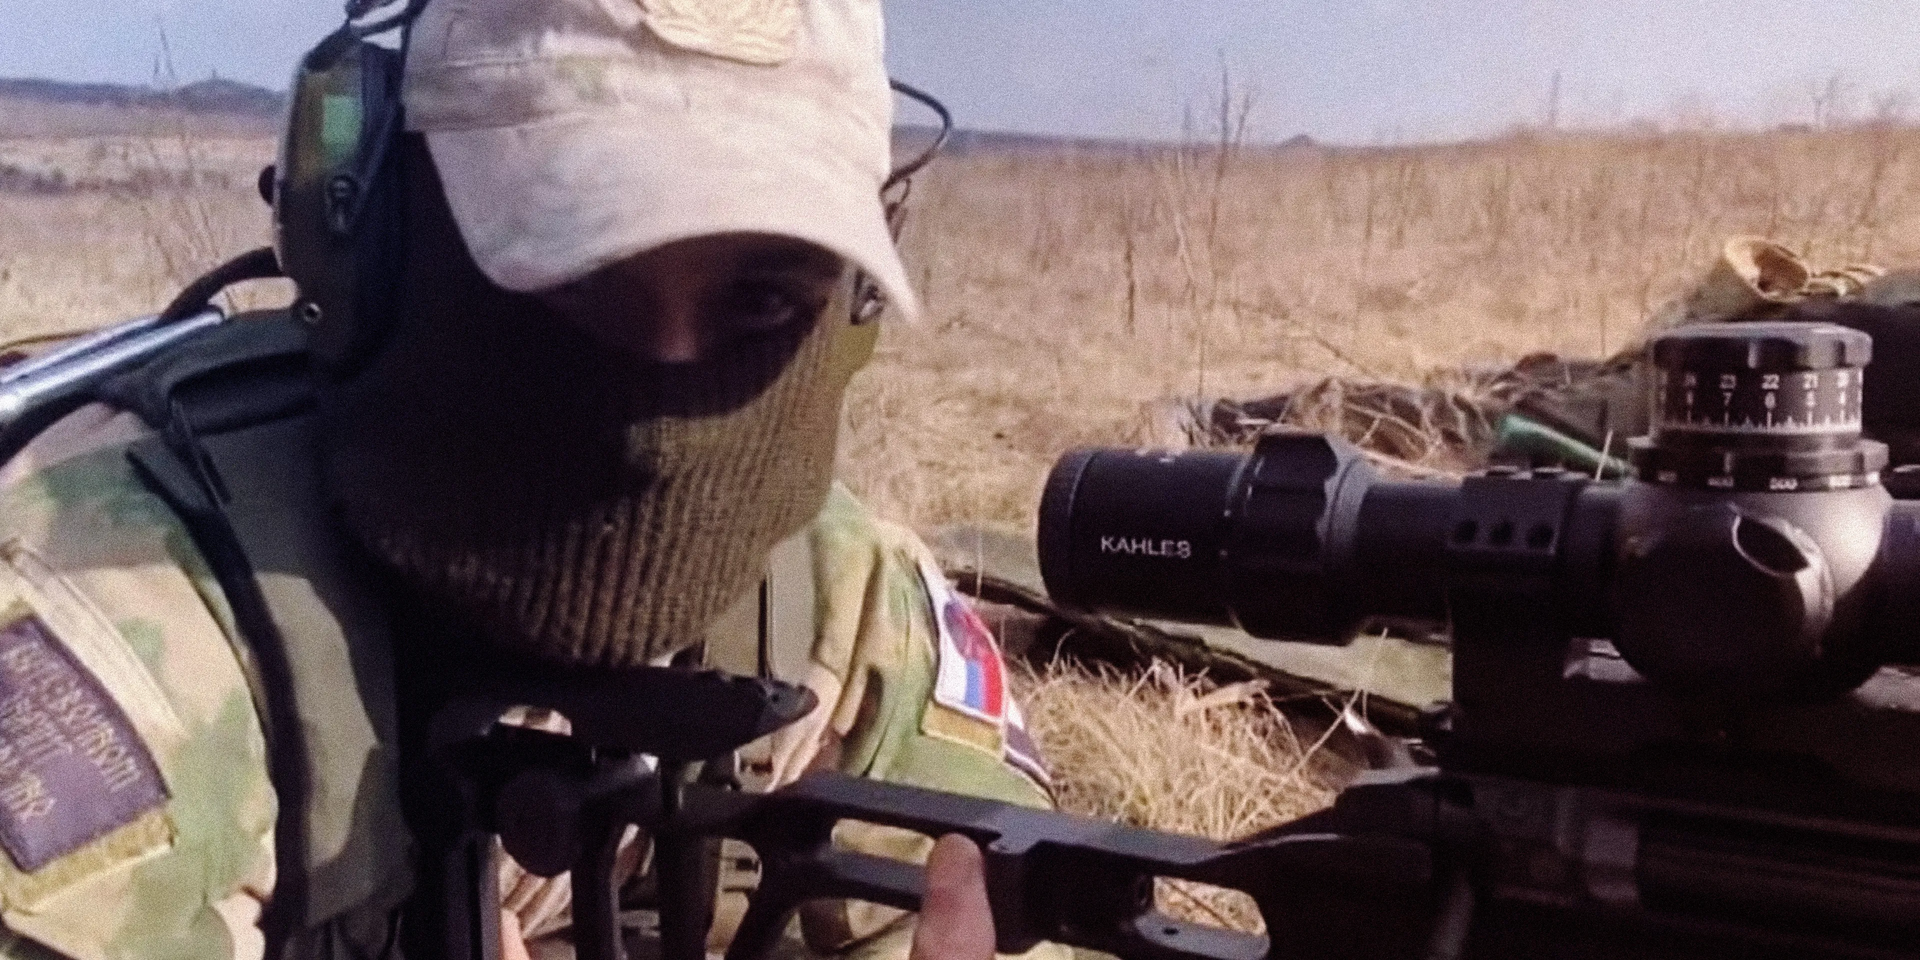 How Do Russian Snipers Get American and European Sights